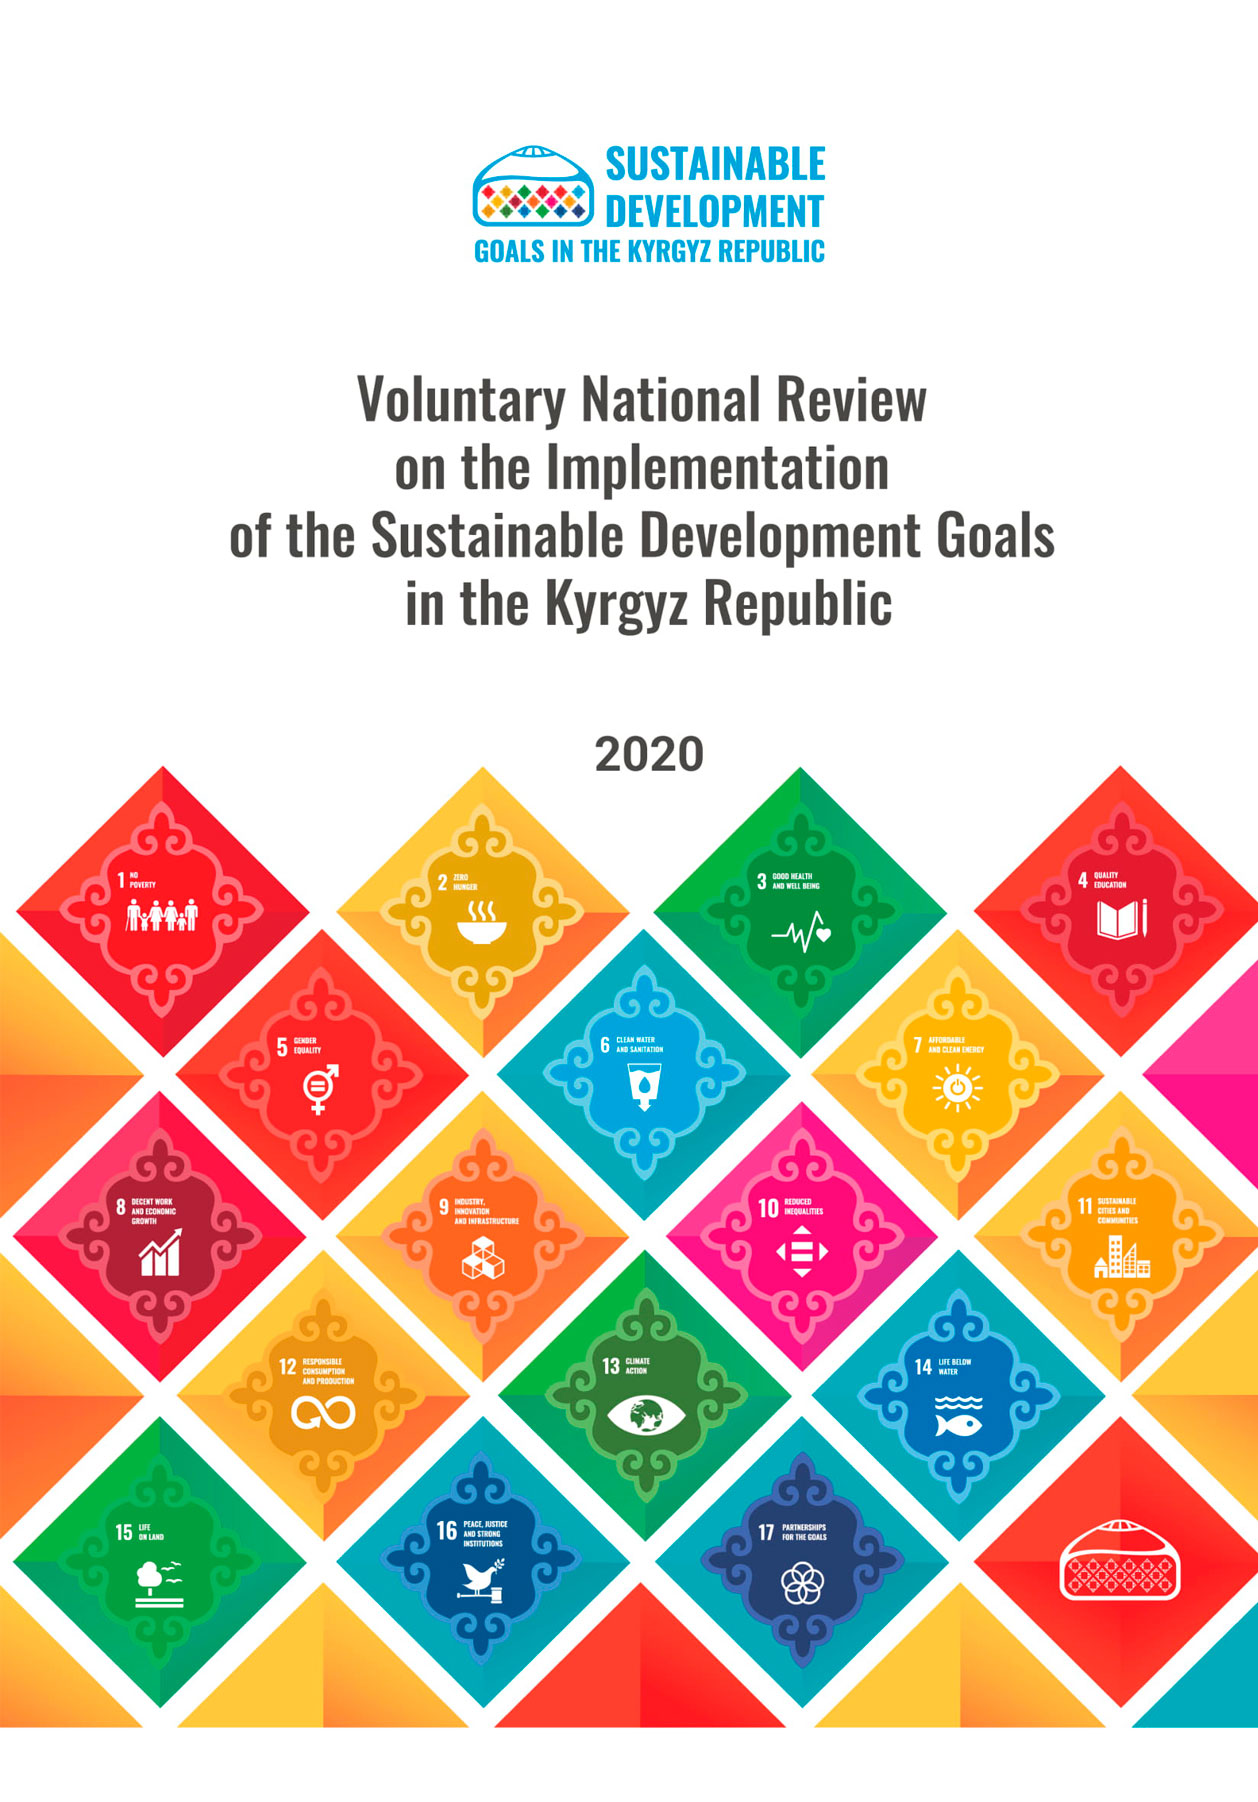 Voluntary National Review on the Implementation of the Sustainable Development Goals in the Kyrgyz Republic